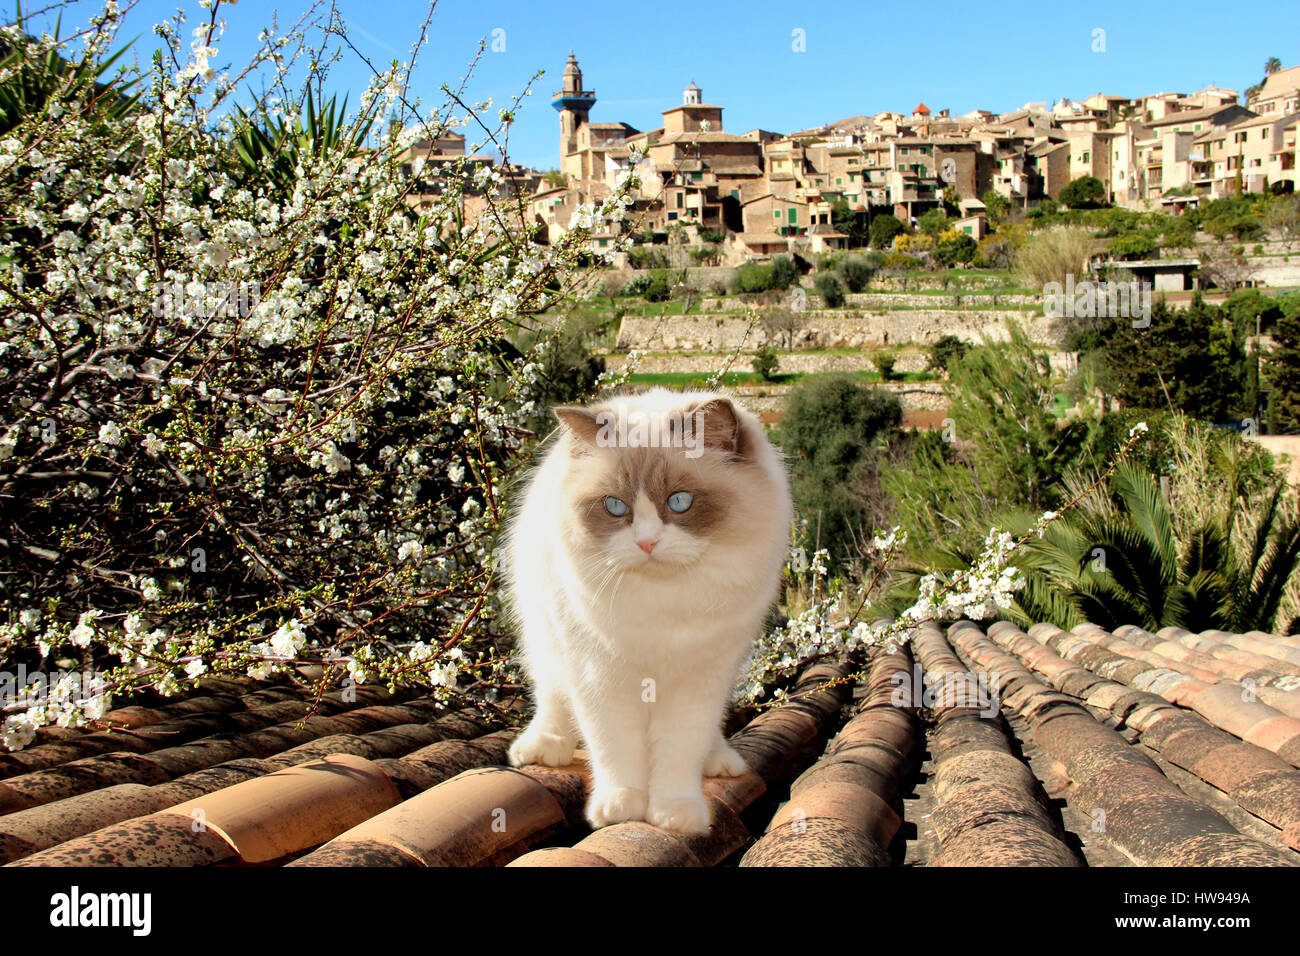 domestic cat, ragdoll, is standing on a roof in front of the mountain village Valldemossa, Spain, Baleares, Mallorca, spring Stock Photo